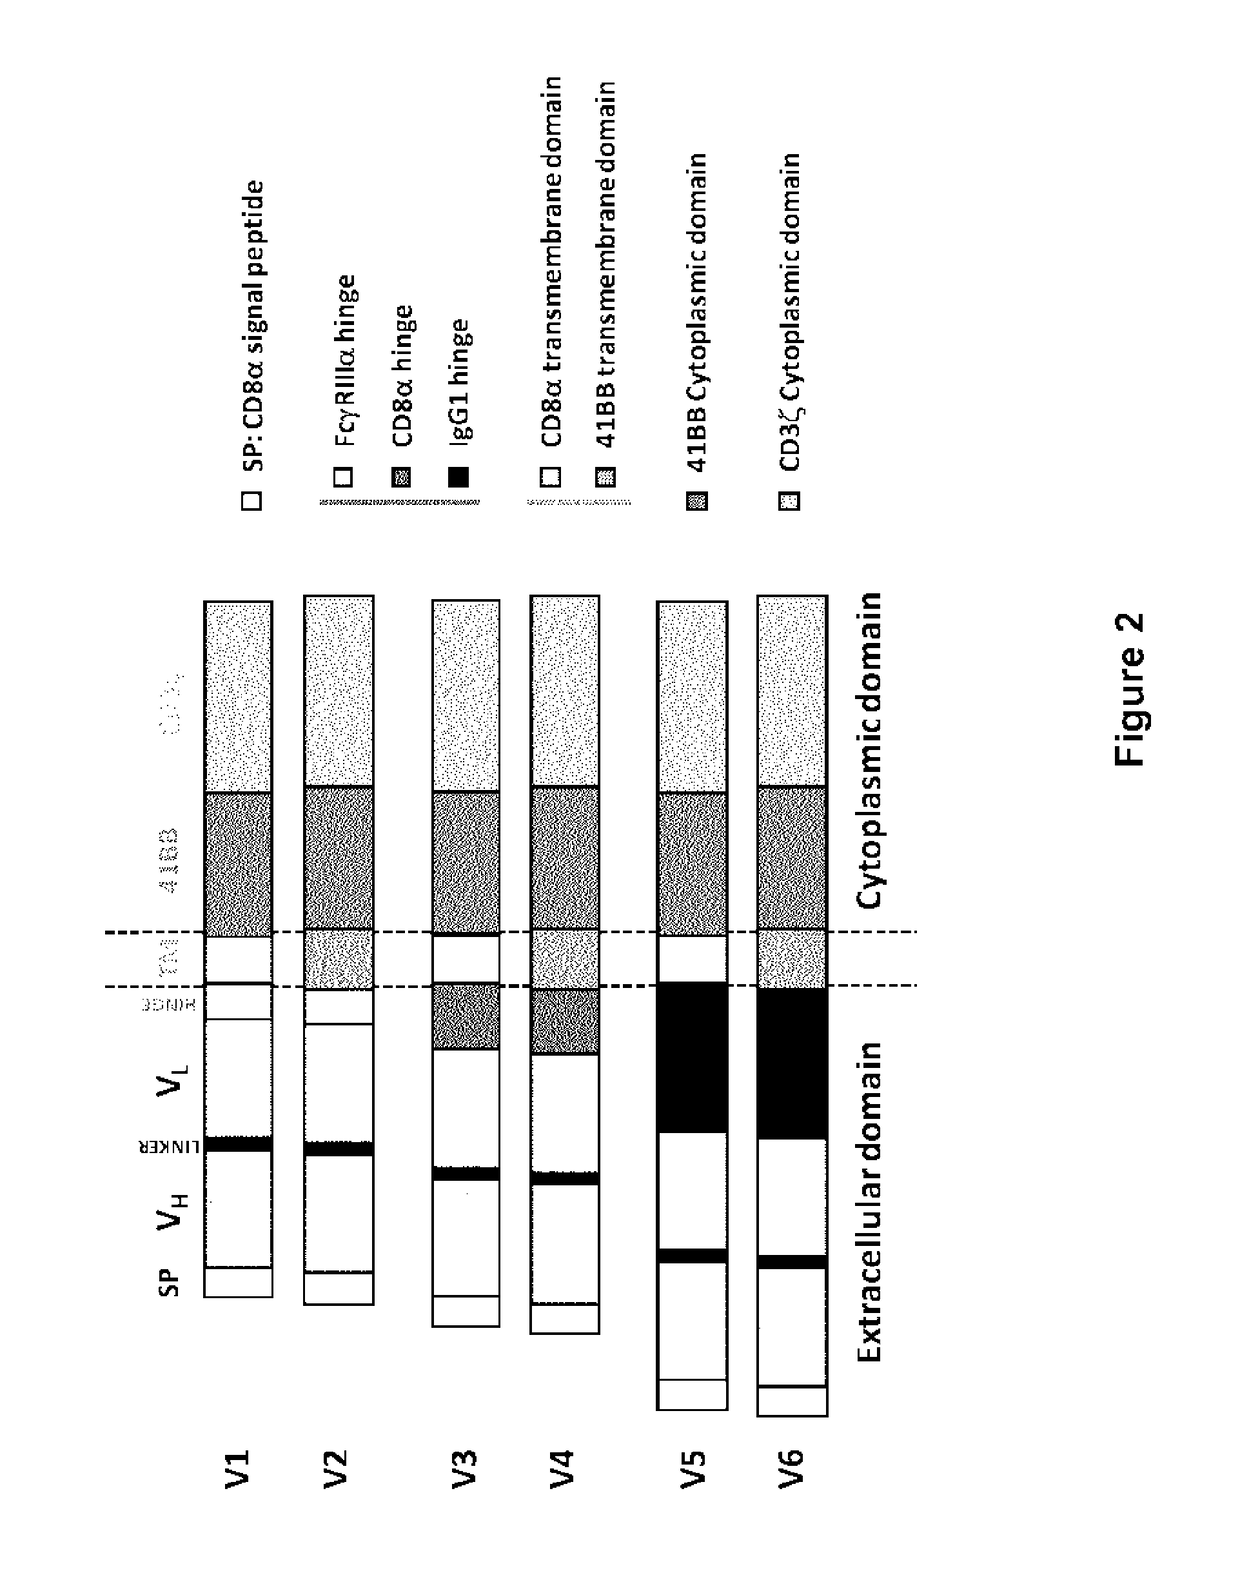 CD123 specific chimeric antigen receptors for cancer immunotherapy